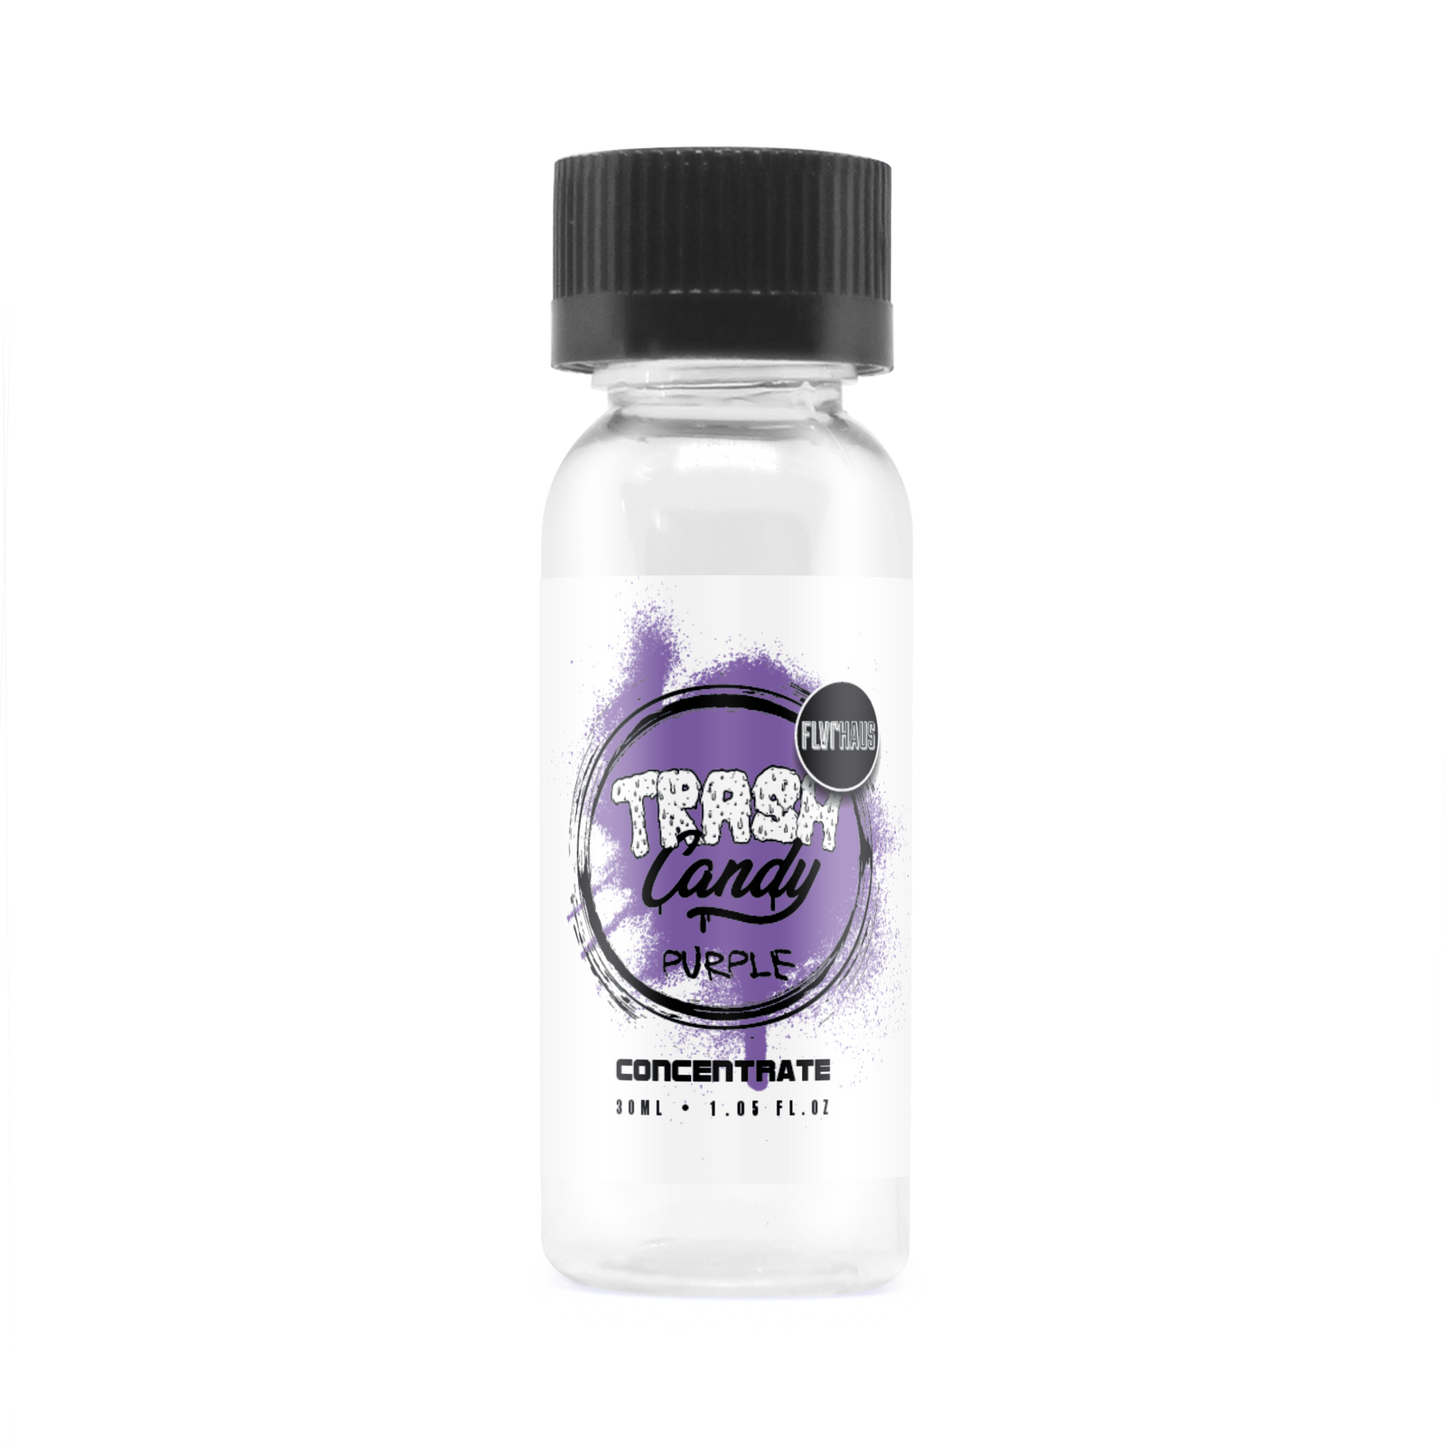 Trash Candy - Purple Gummy FLVRHAUS DIY 30ml Concentrate - The Ace Of Vapez